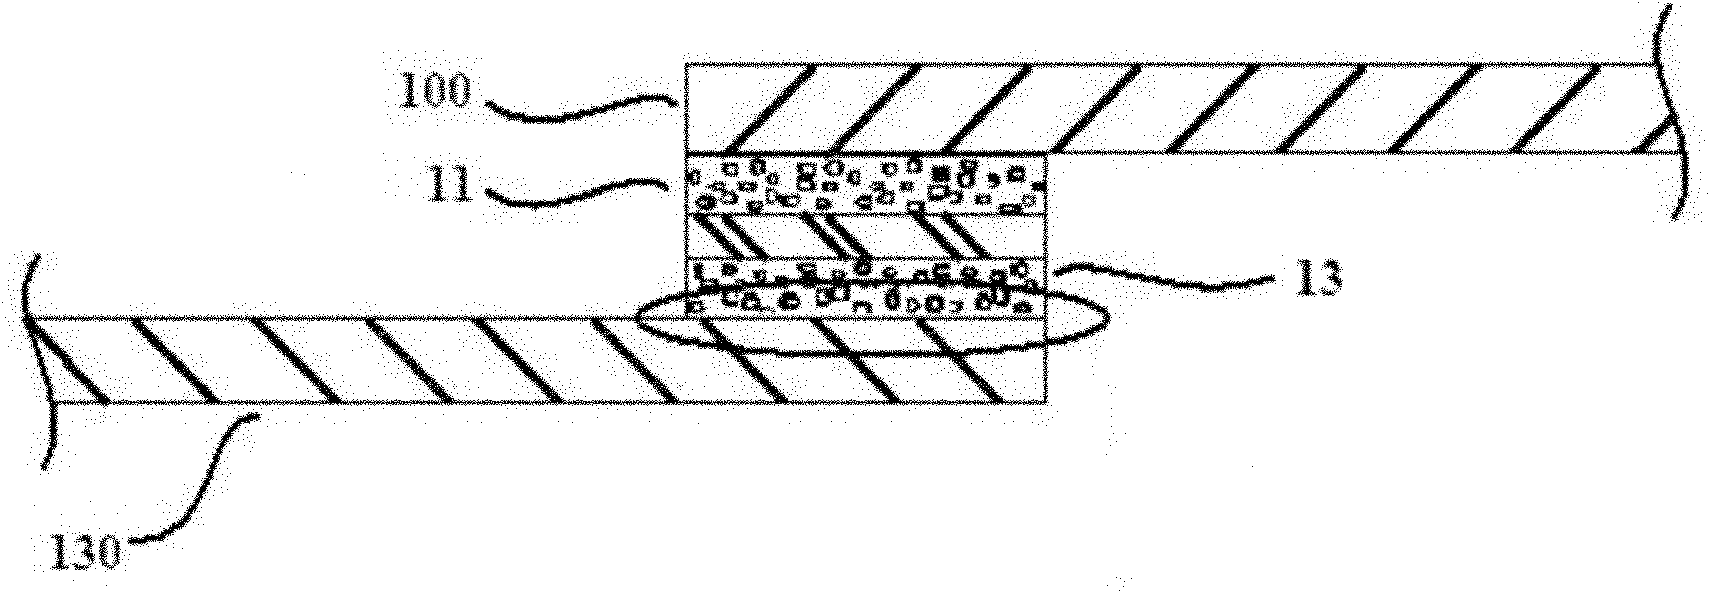 Pressure-sensitive adhesive composite with repulping property and double-sided pressure-sensitive adhesive tape